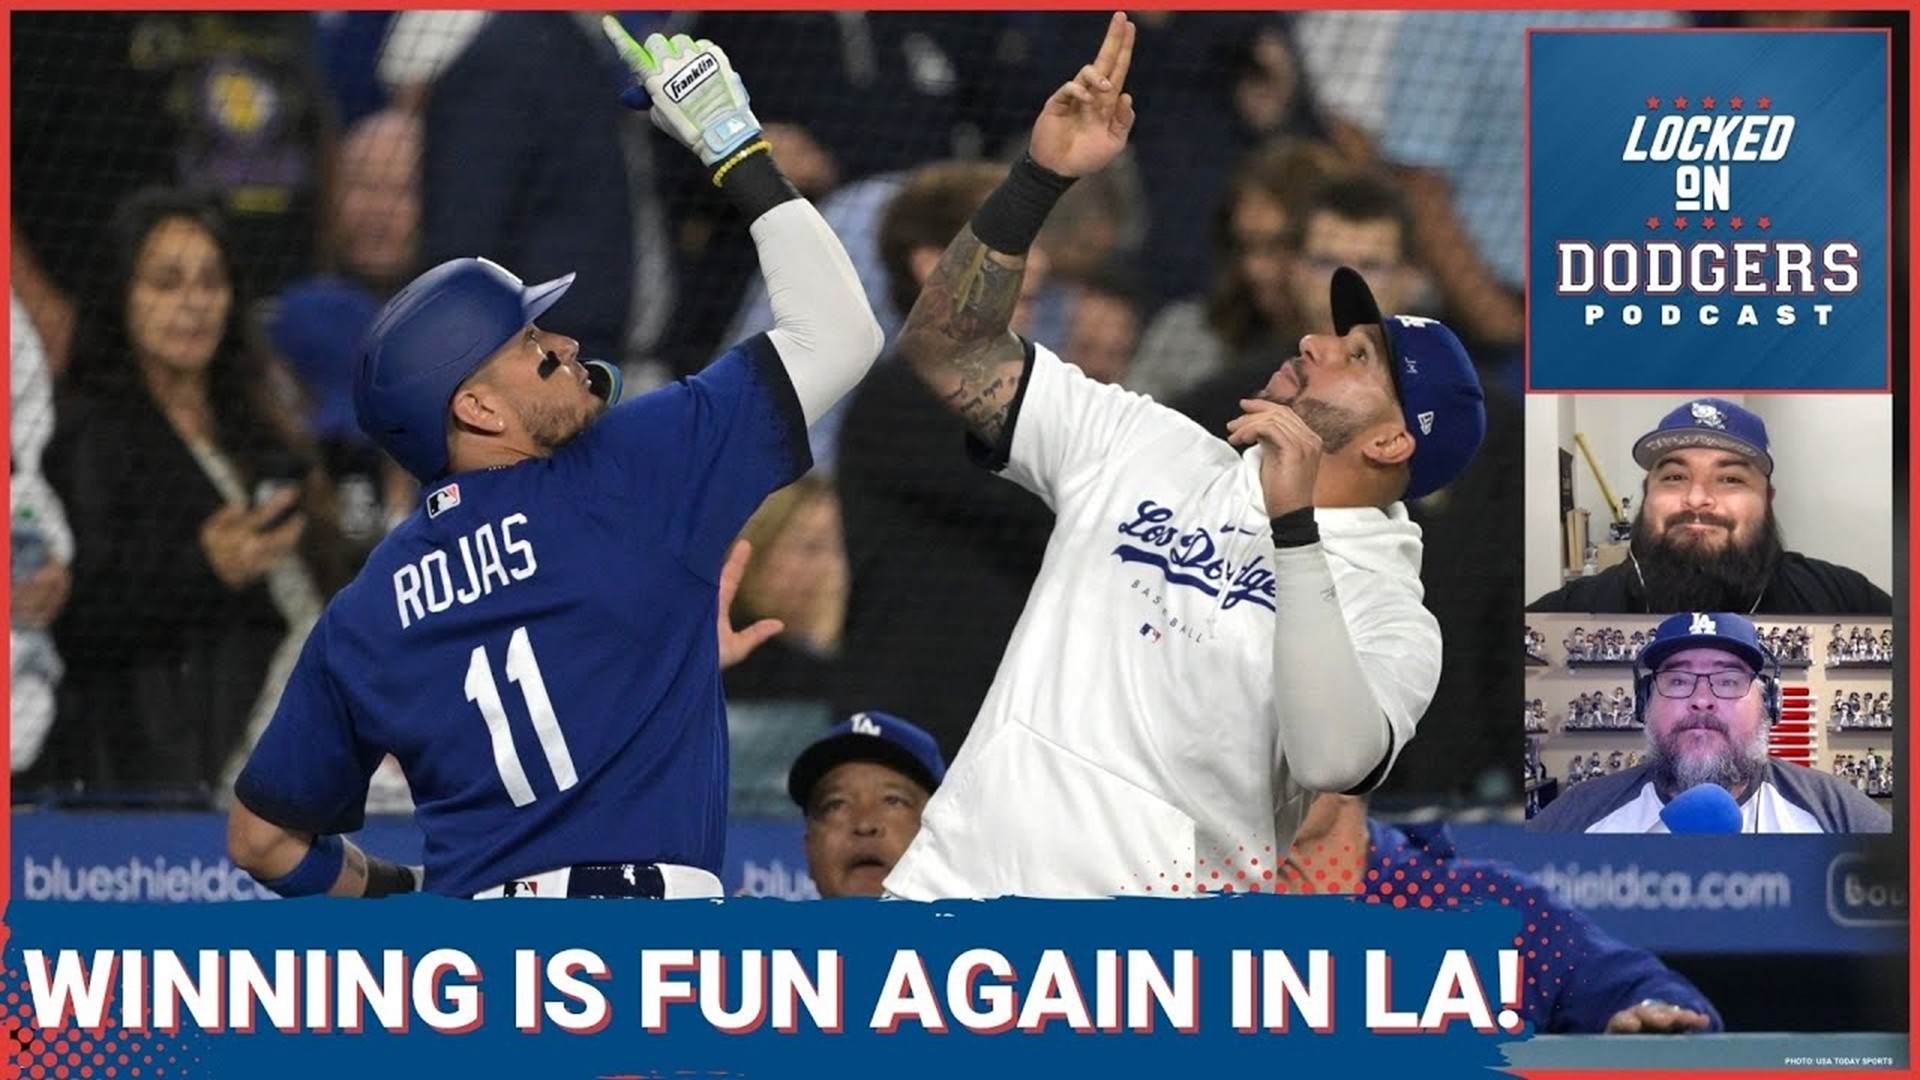 Miguel Rojas was a catalyst in changing the Dodgers' mindset about winning this season.